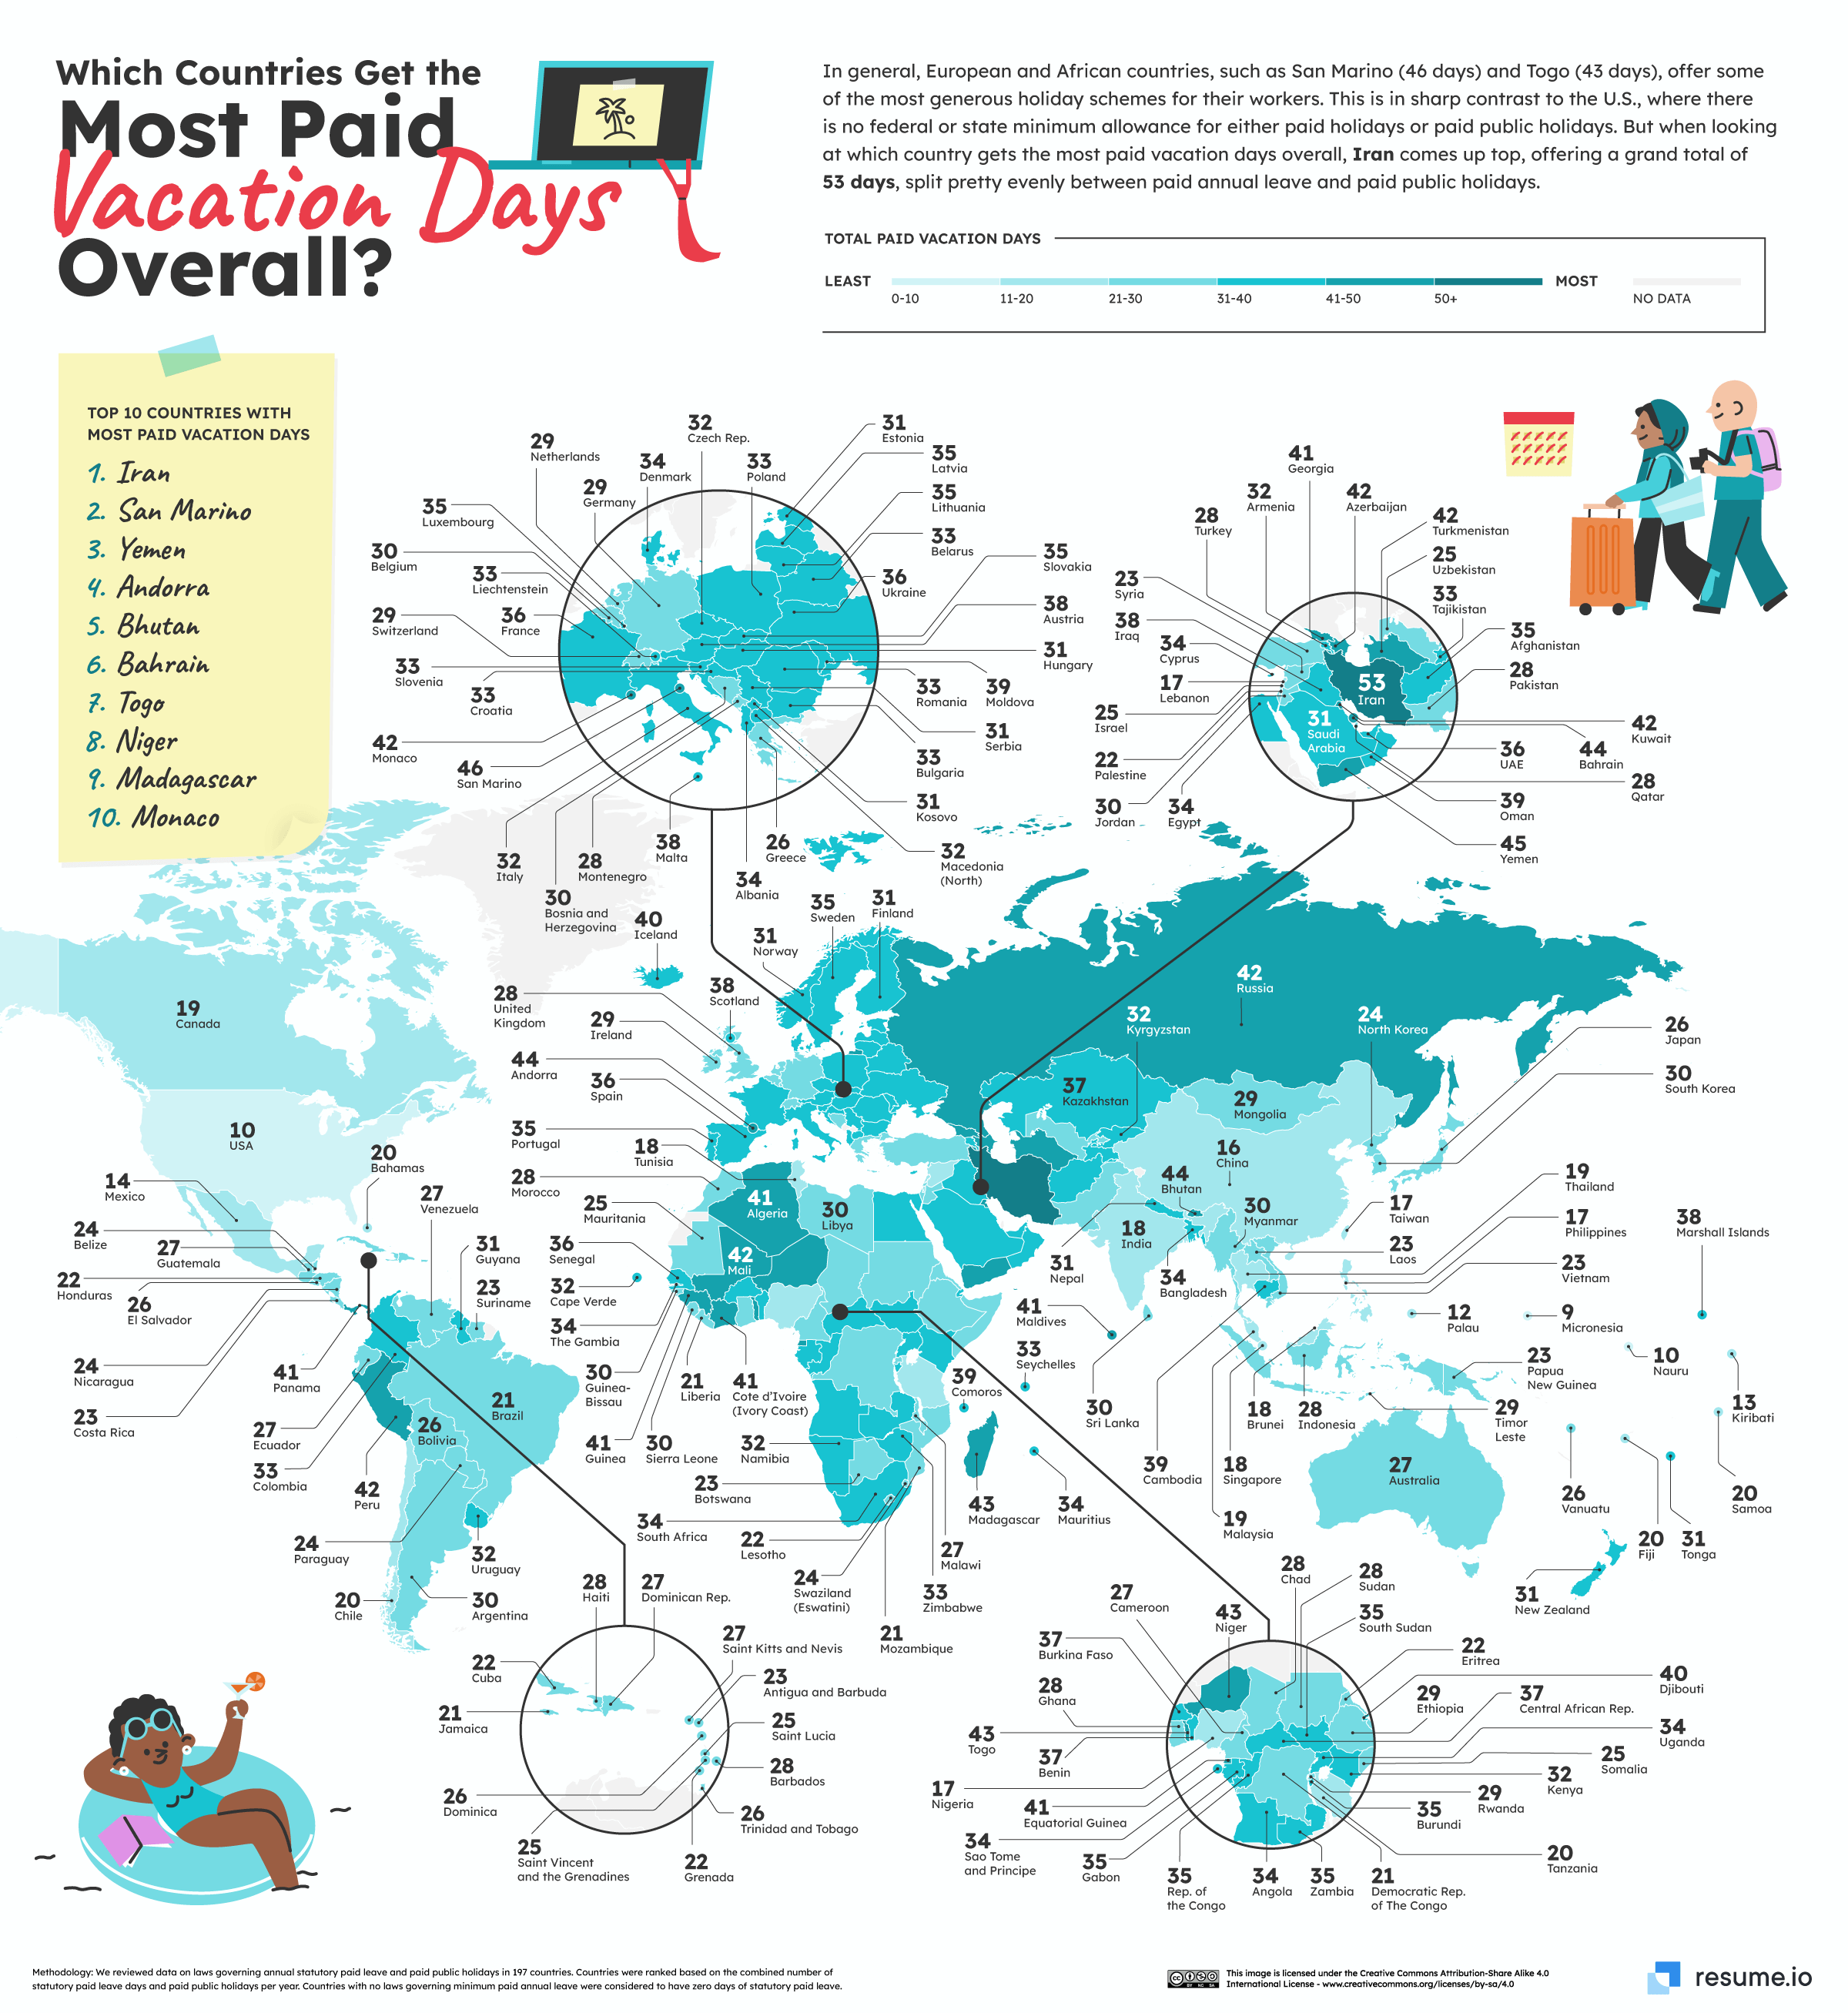 Which Countries Get the Most Paid Vacation Days Overall?